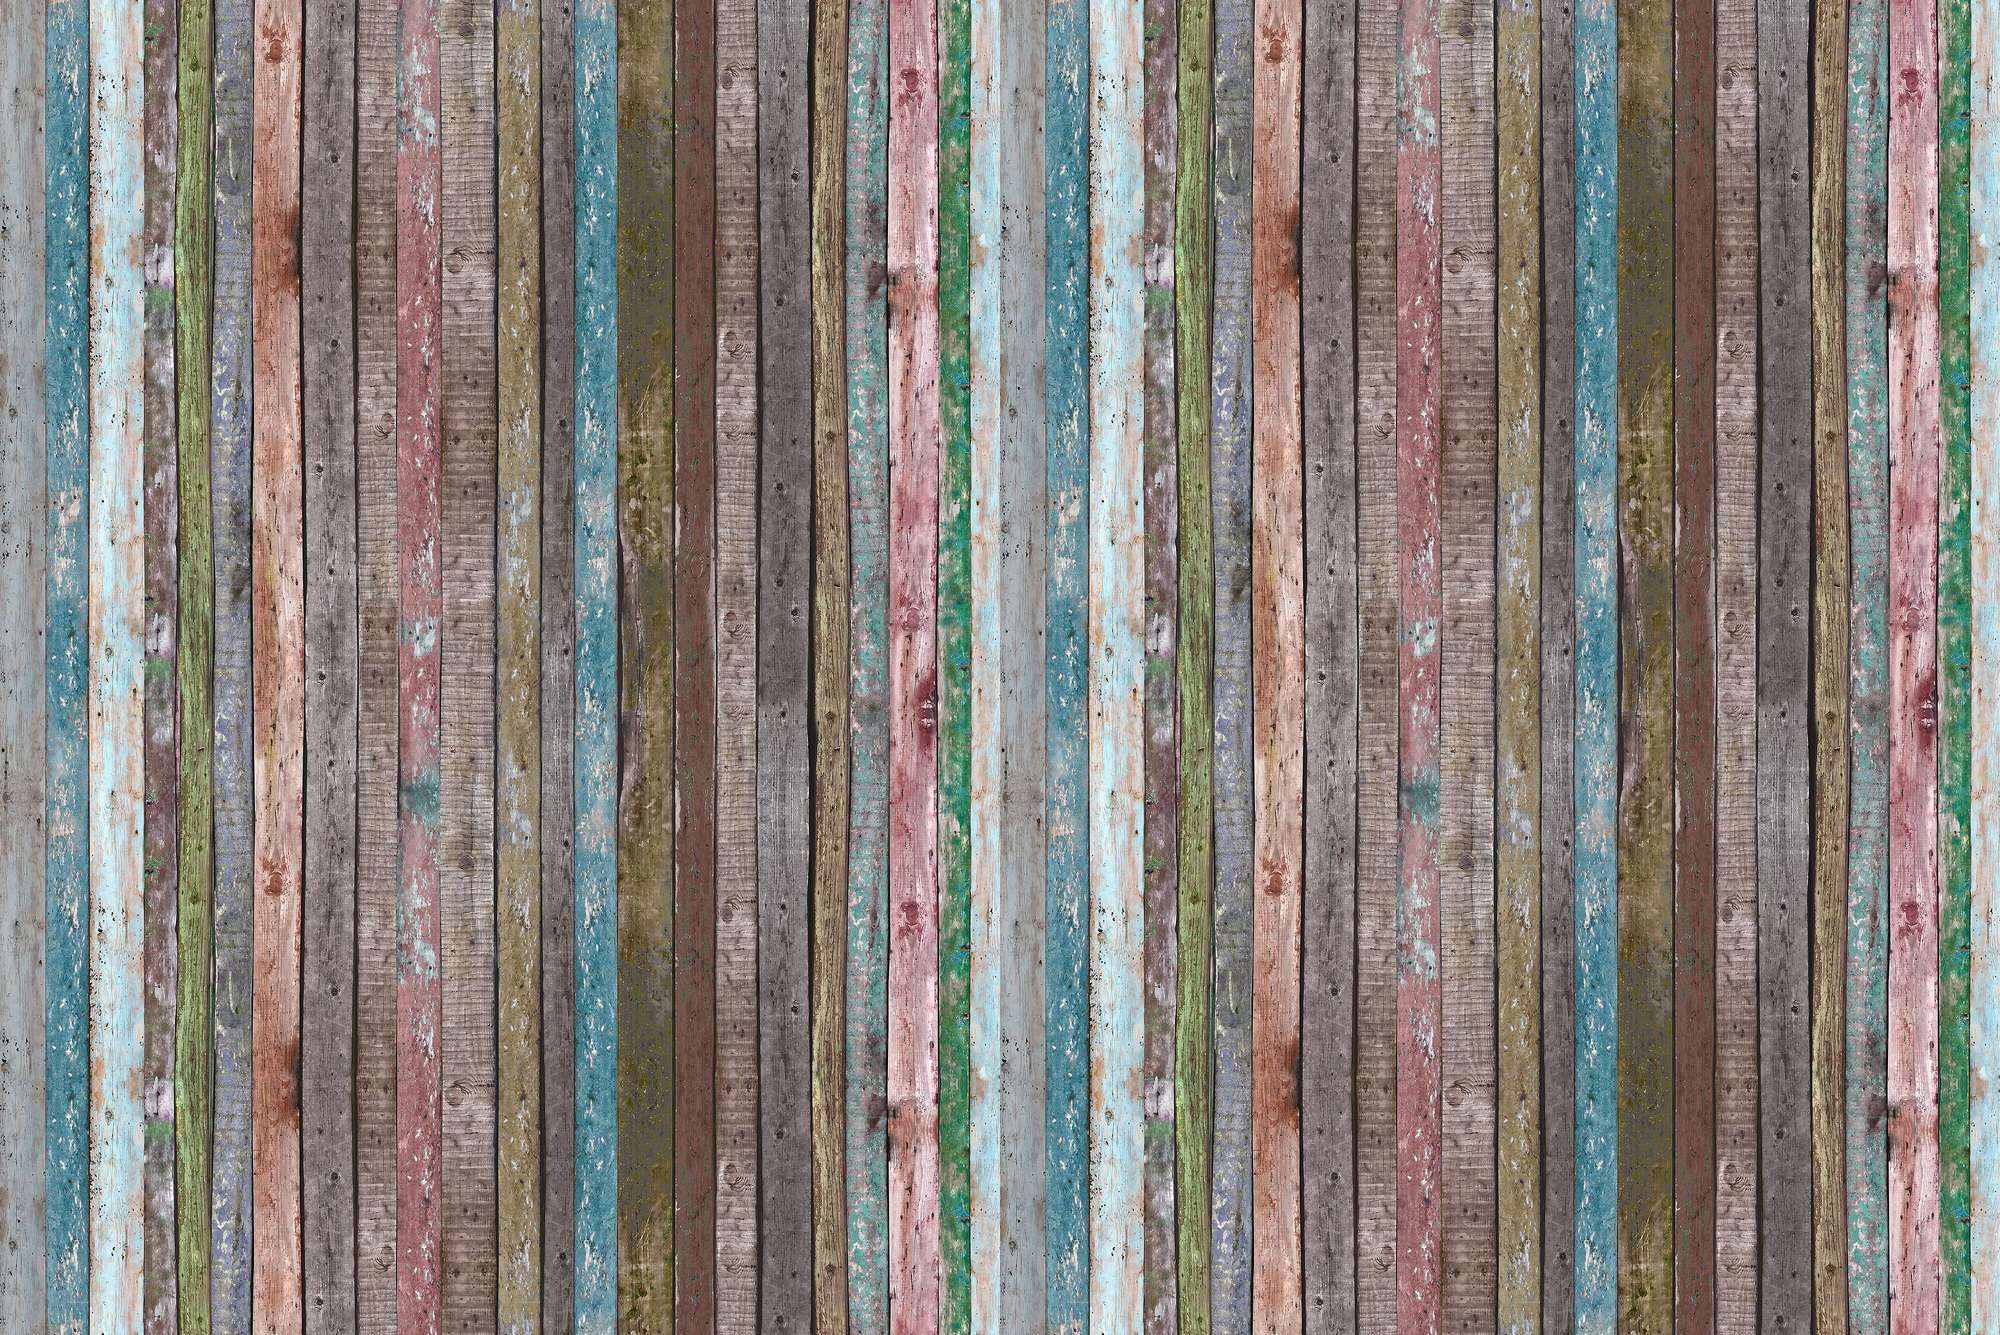             Wood mural fence of boards brown turquoise on premium smooth fleece
        